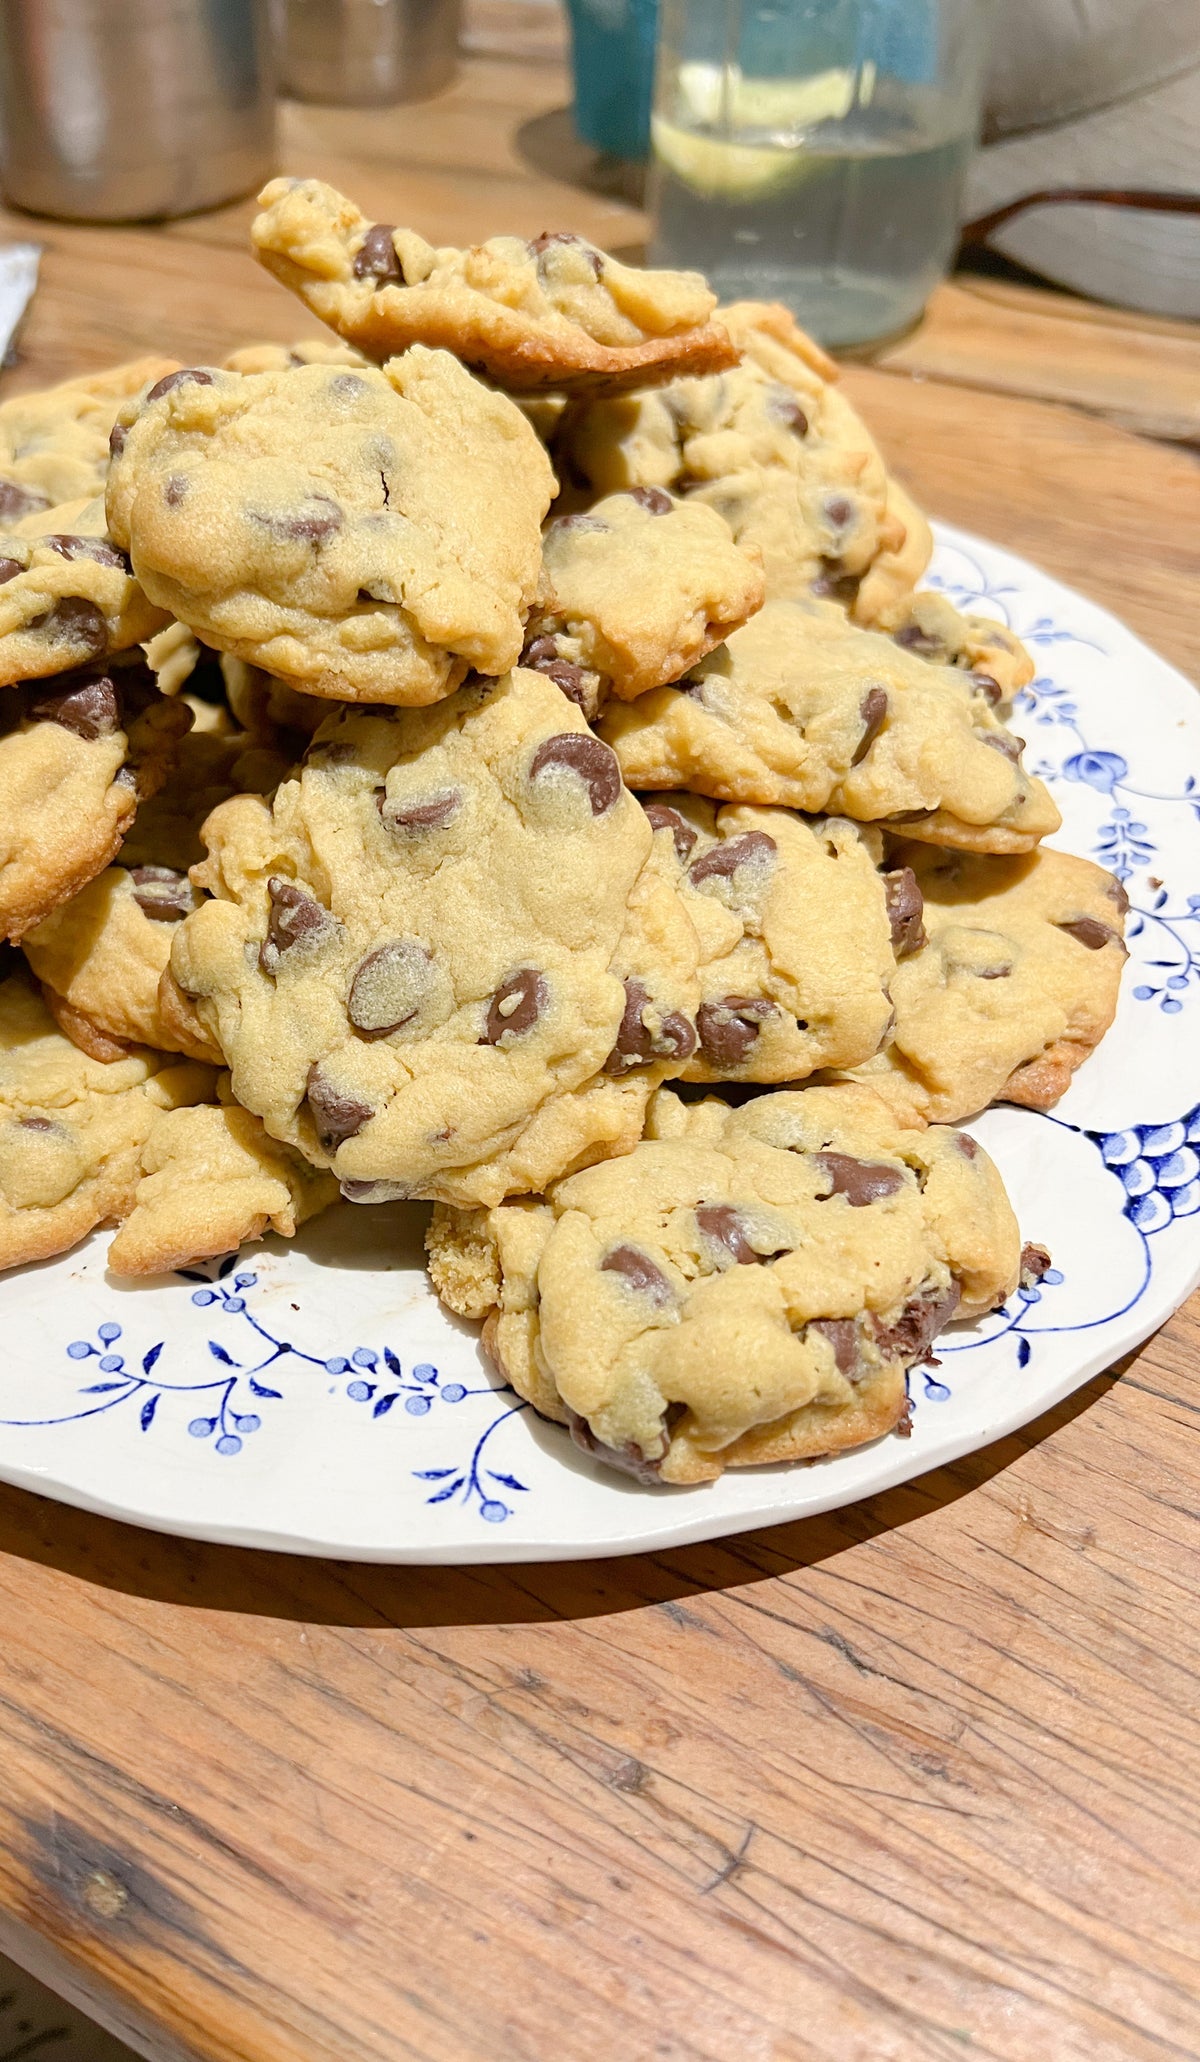 Kerissa's Chewy Chocolate Chip Cookies